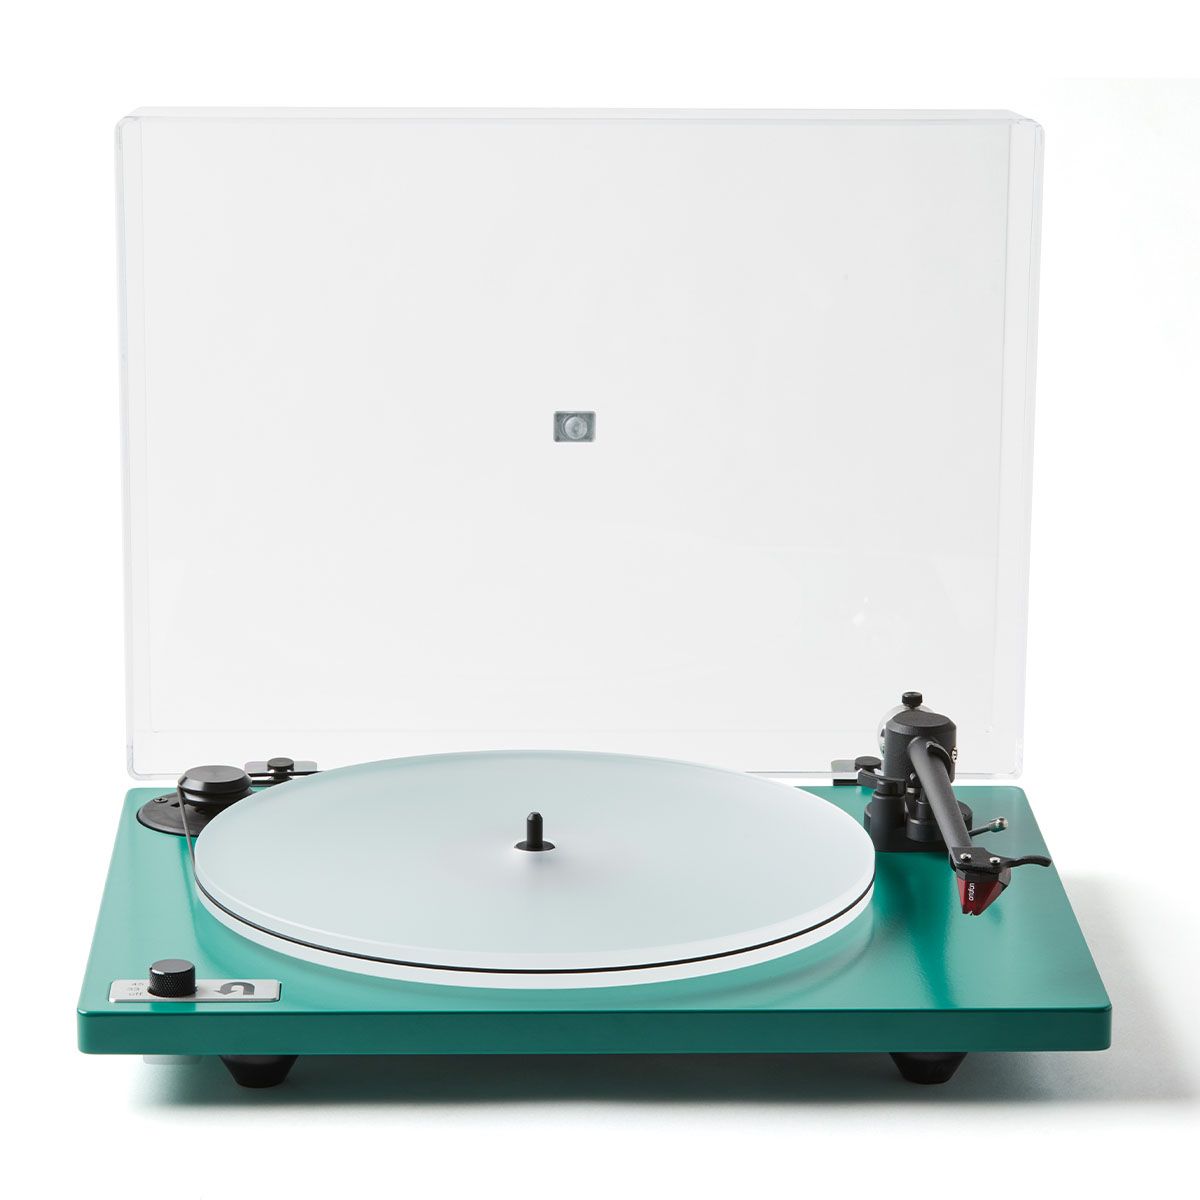 U-Turn Orbit Special Turntable in green on white background w/ dustcover open